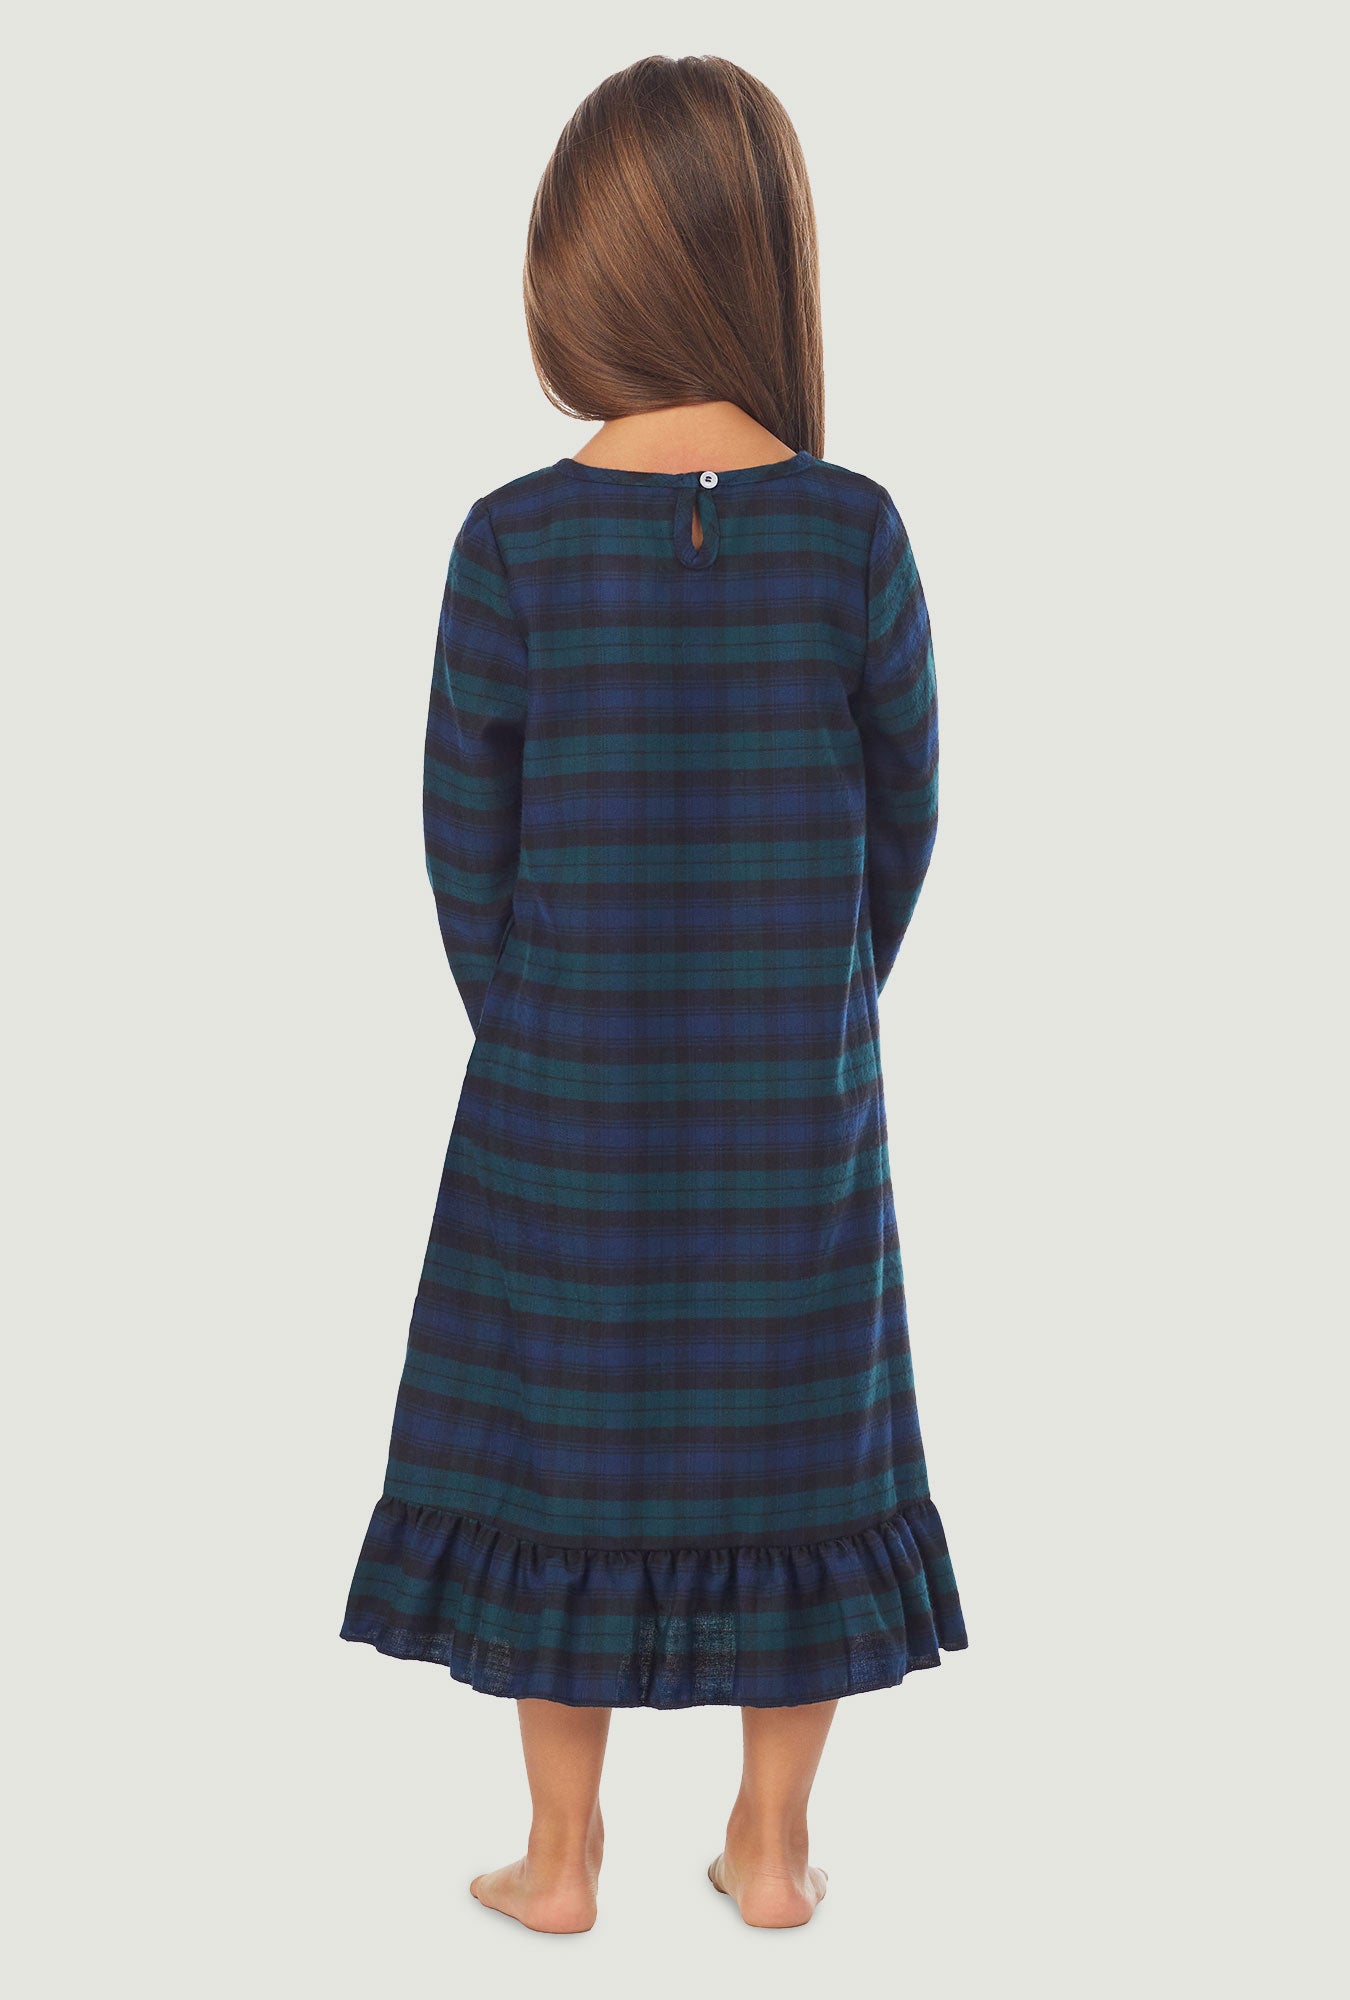 A girl wearing a black watch plaid long sleeve nightgown.